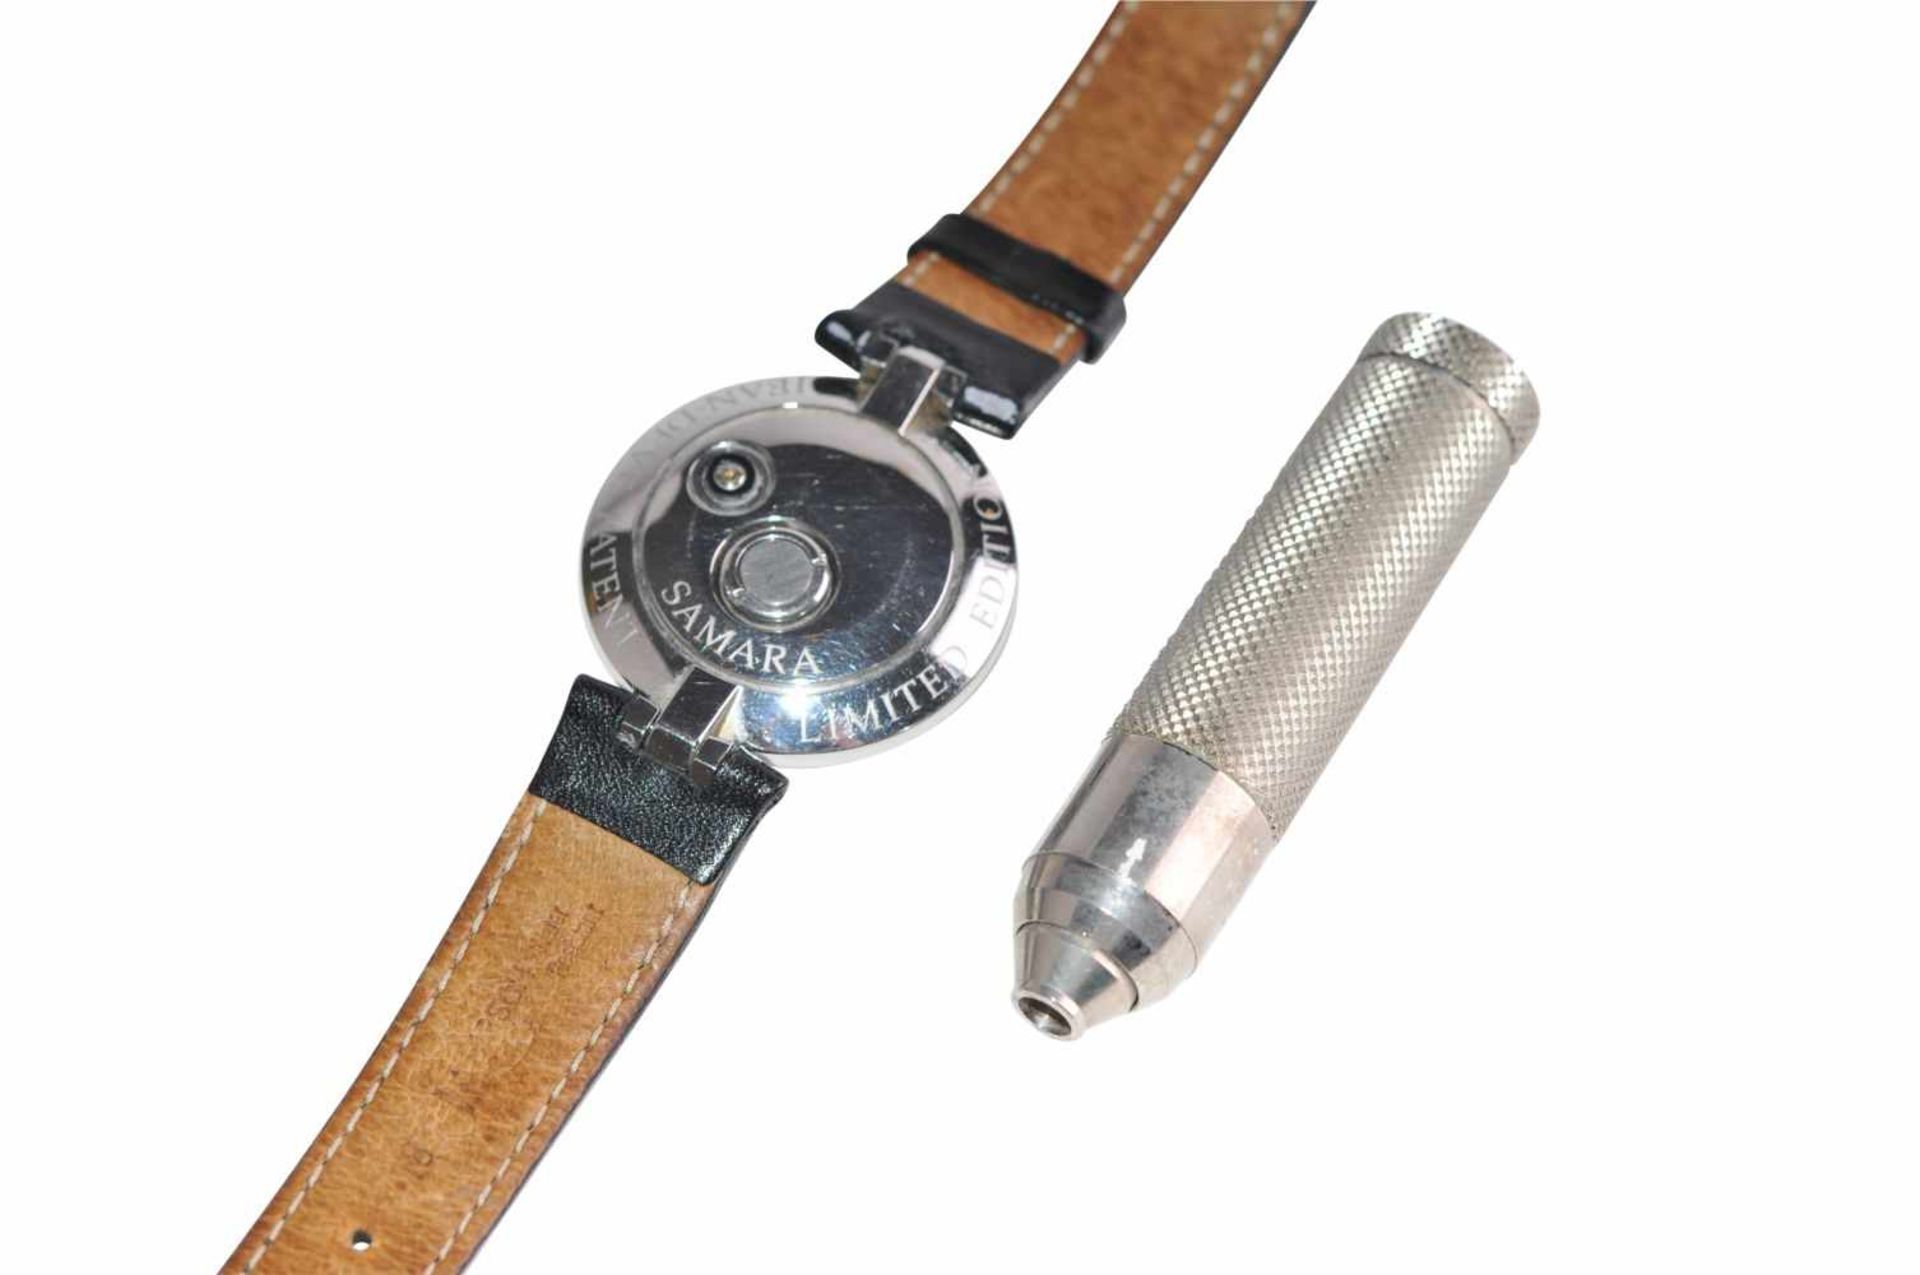 Jean d´Eve SamaraThe first automatic quartz watch built in 1988 by LePhare, Jean d'Eve, for the - Image 4 of 4